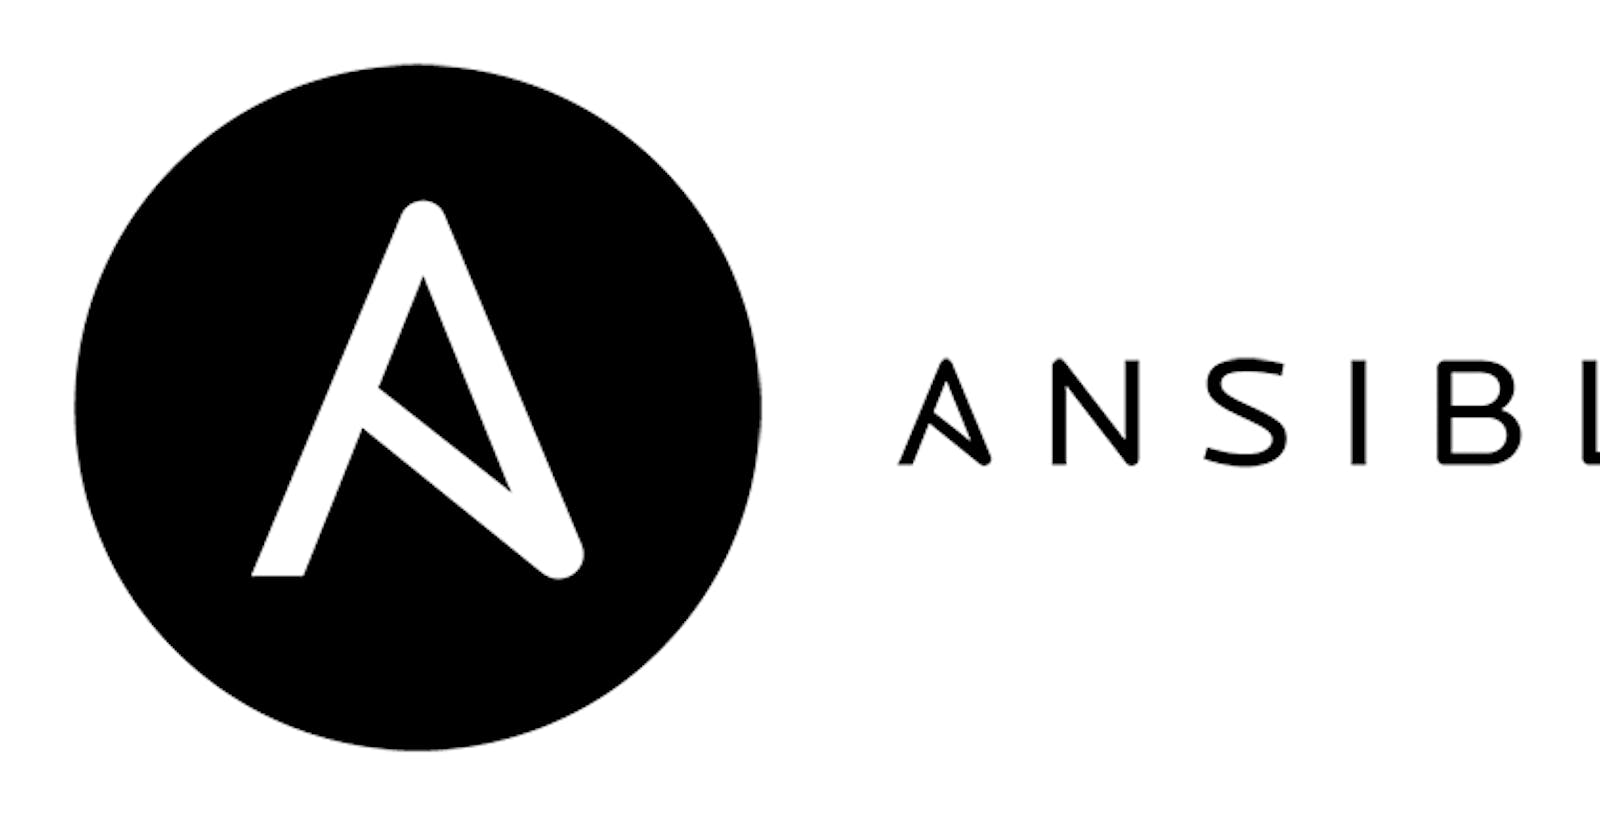 Configuring docker container using Ansible